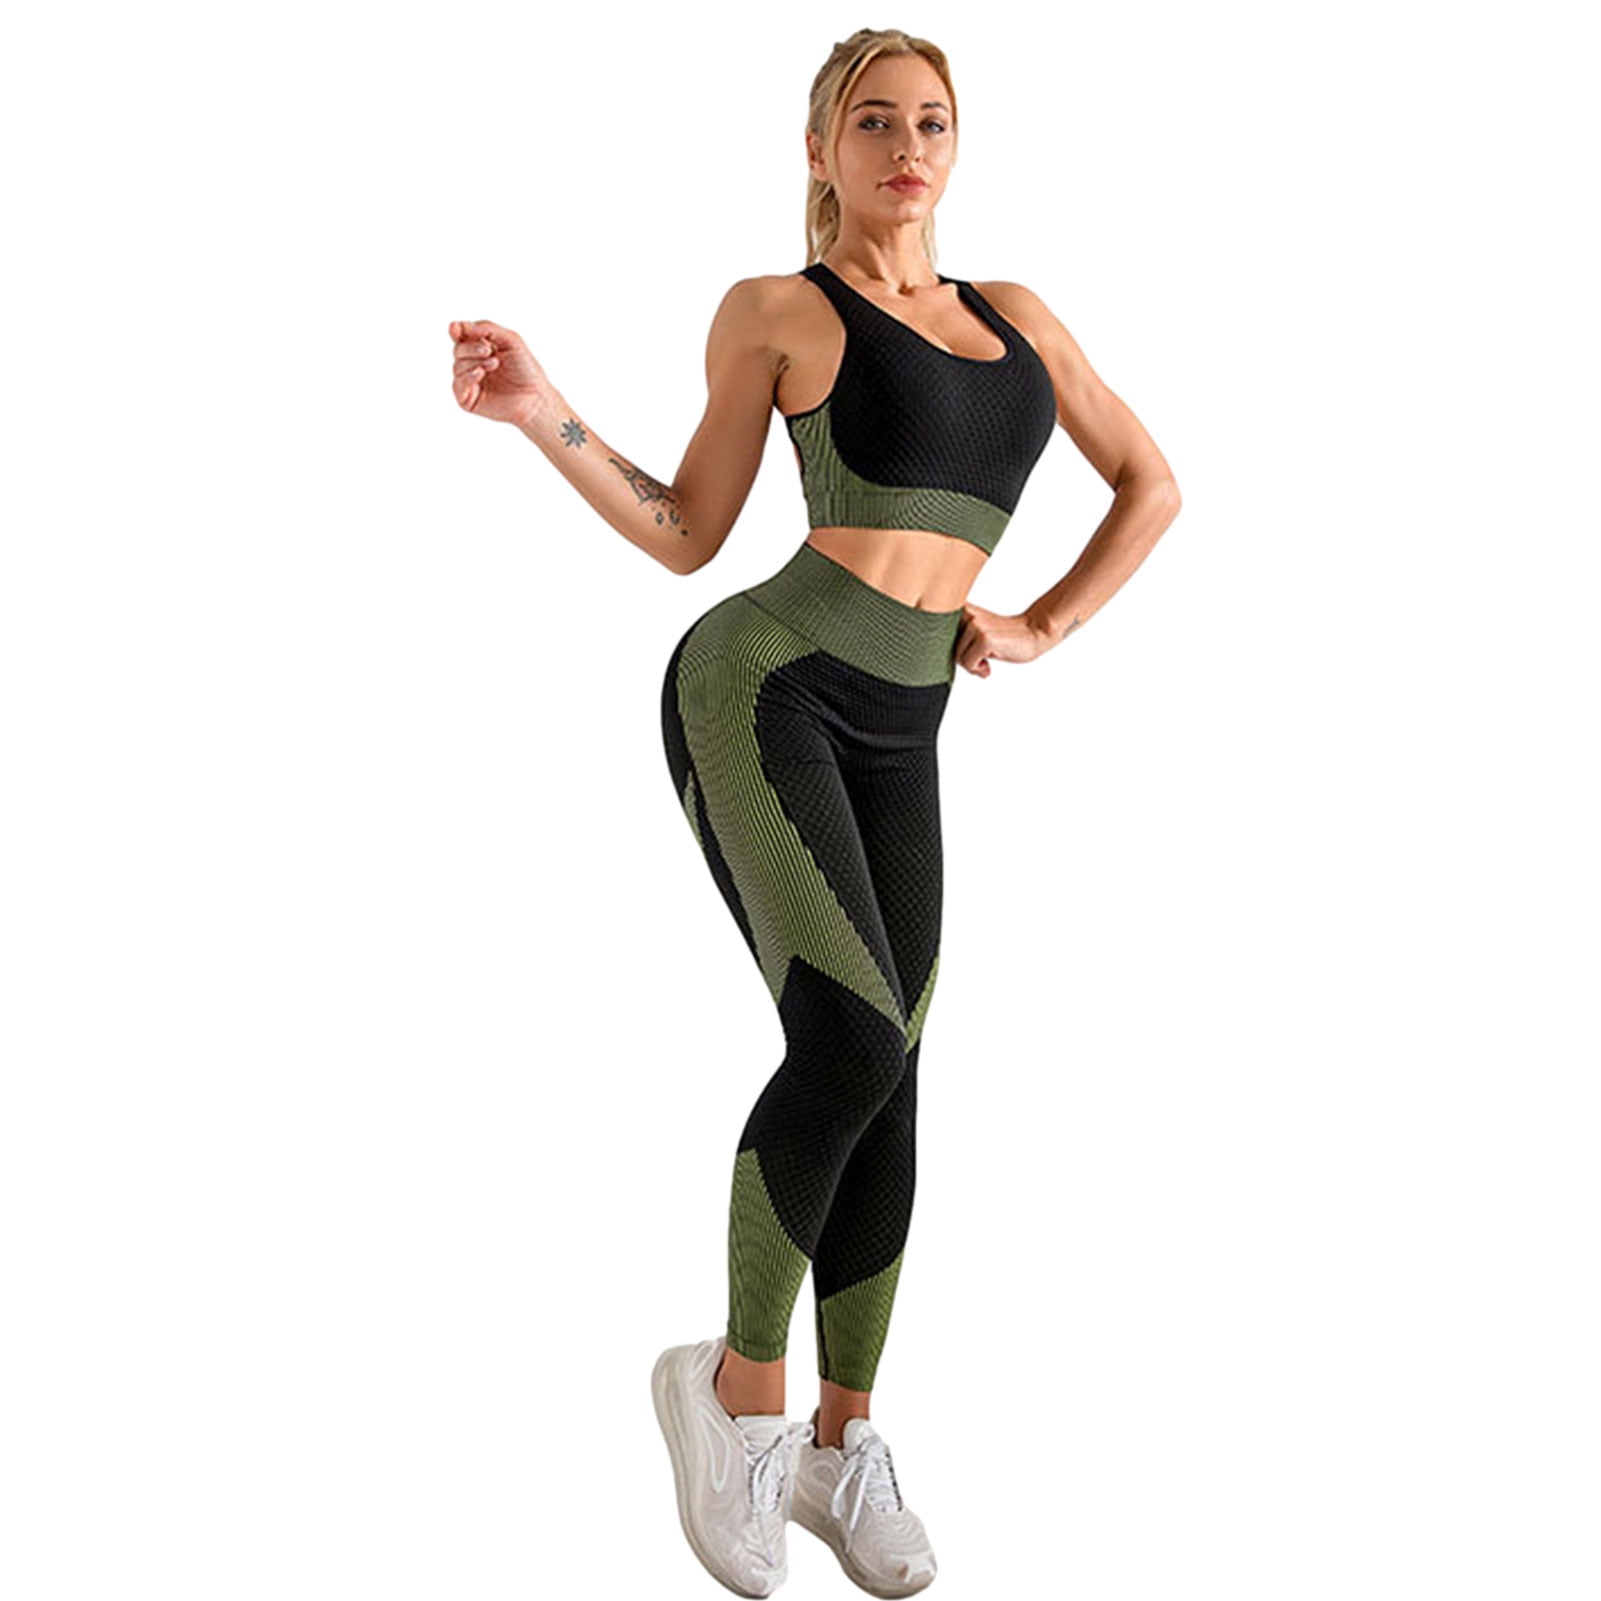 Details about   Women's Long Fitness Running Sports Yoga Top Gym Tops Active S M sizes 